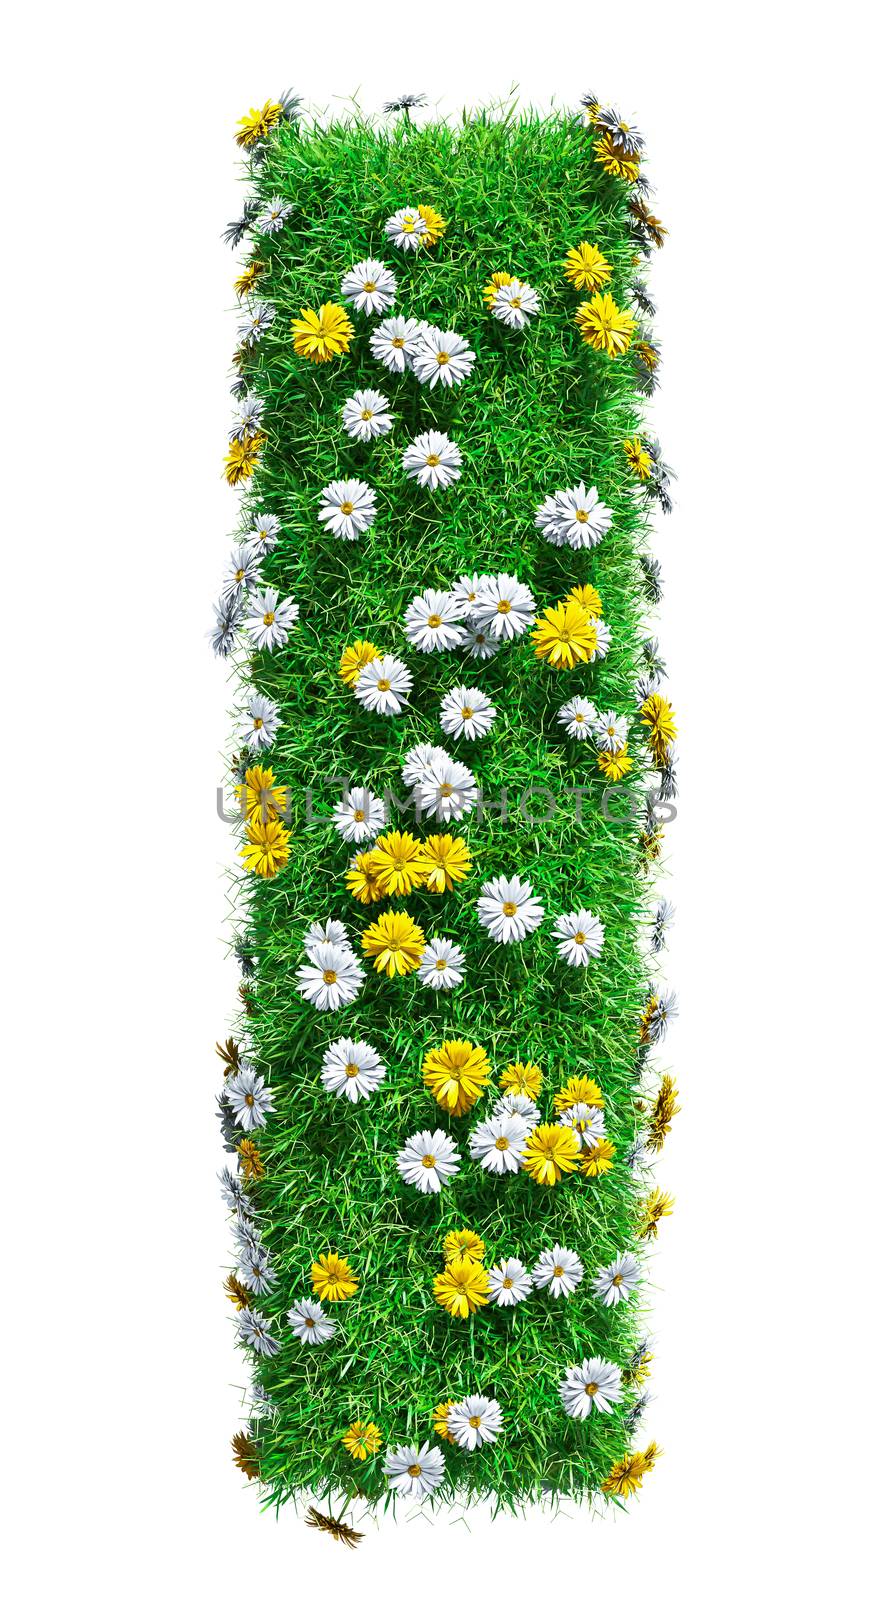 Letter I Of Green Grass And Flowers. Isolated On White Background. Font For Your Design. 3D Illustration